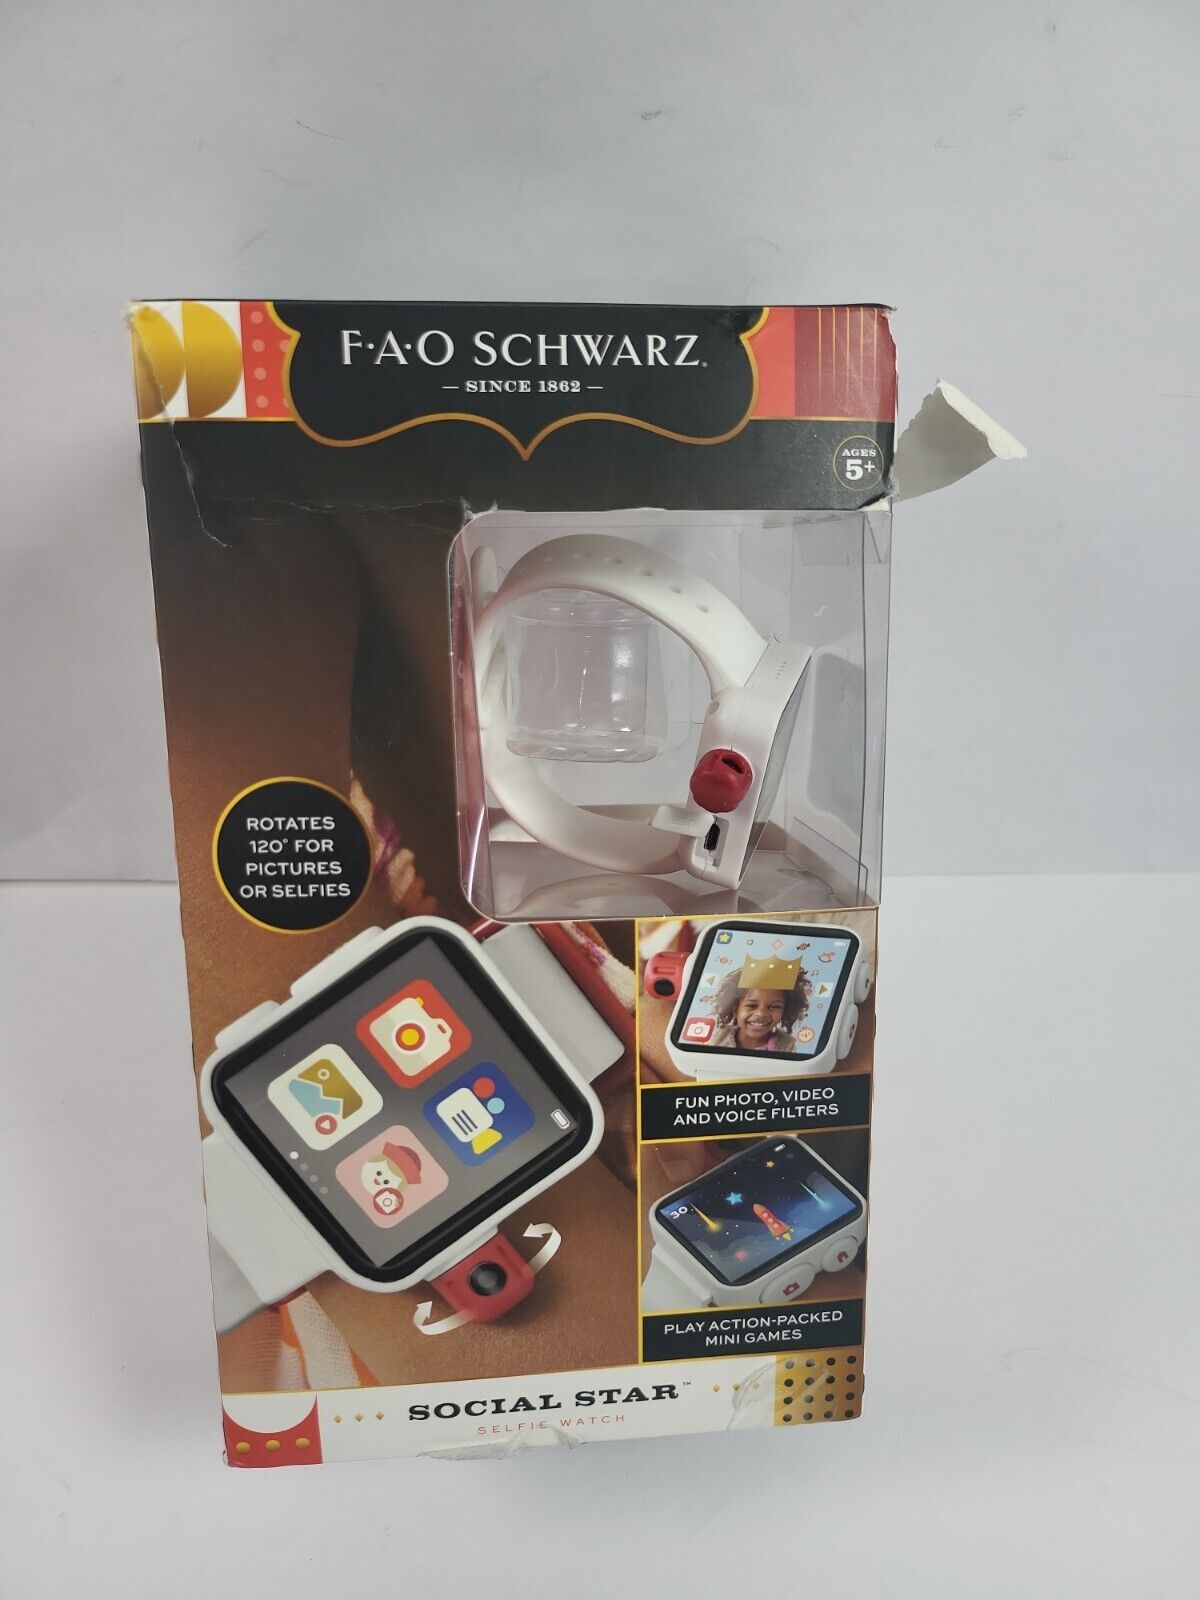 FAO Schwarz Social Star Selfie Smart Watch Rotates 120* For Pictures New.     92